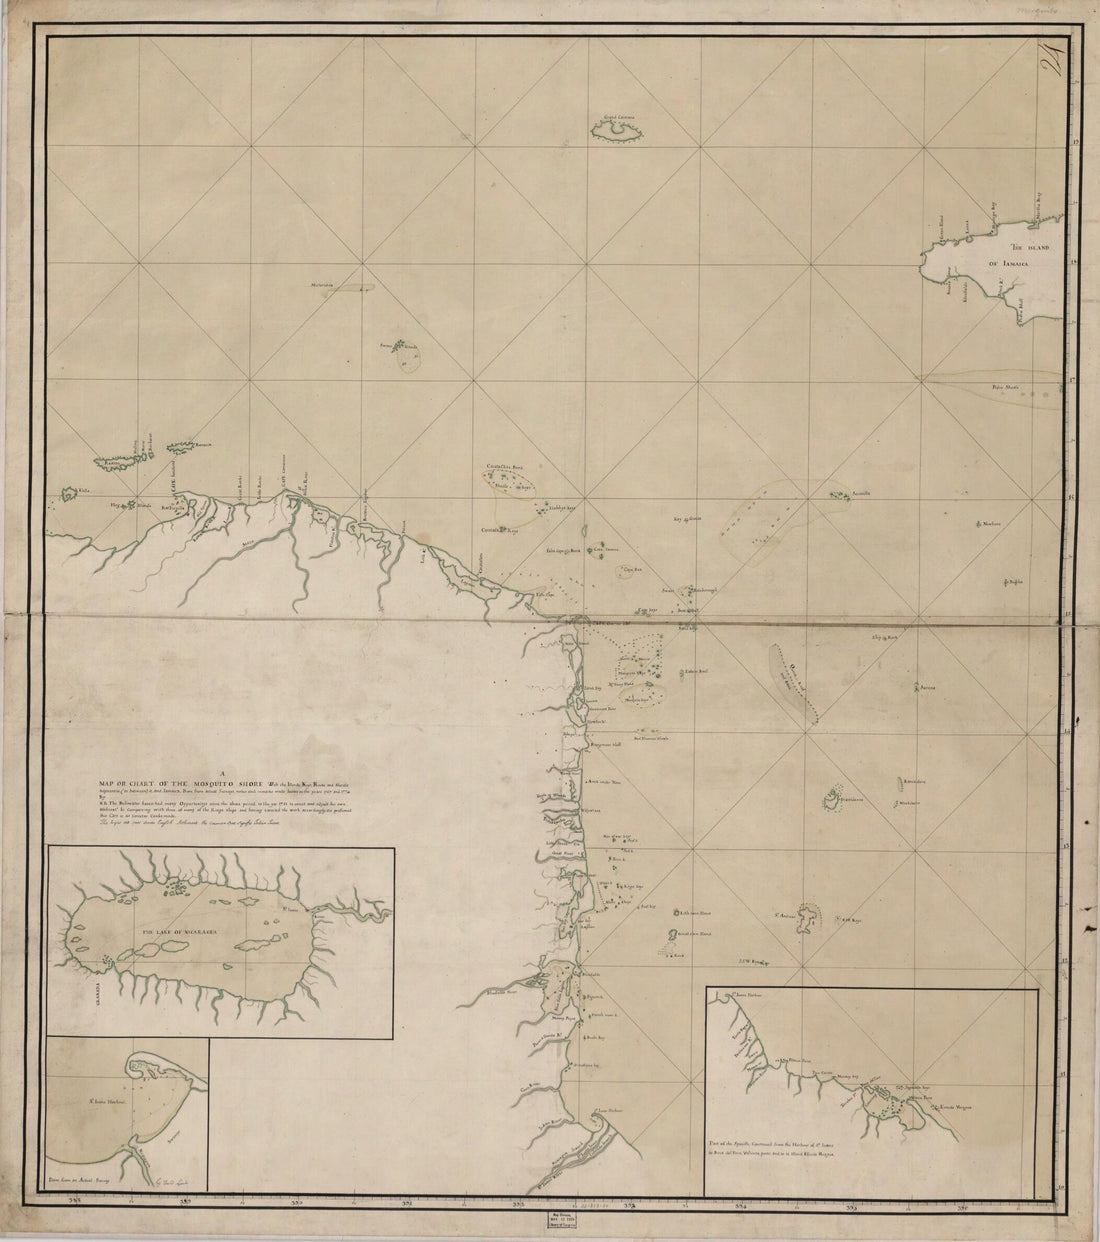 This old map of A Map Or Chart of the Mosquito Shore : With the Islands, Keys, Rocks and Shoals, Adjacent to (or Between) It and Iamaica from 1781 was created by David Lambi in 1781